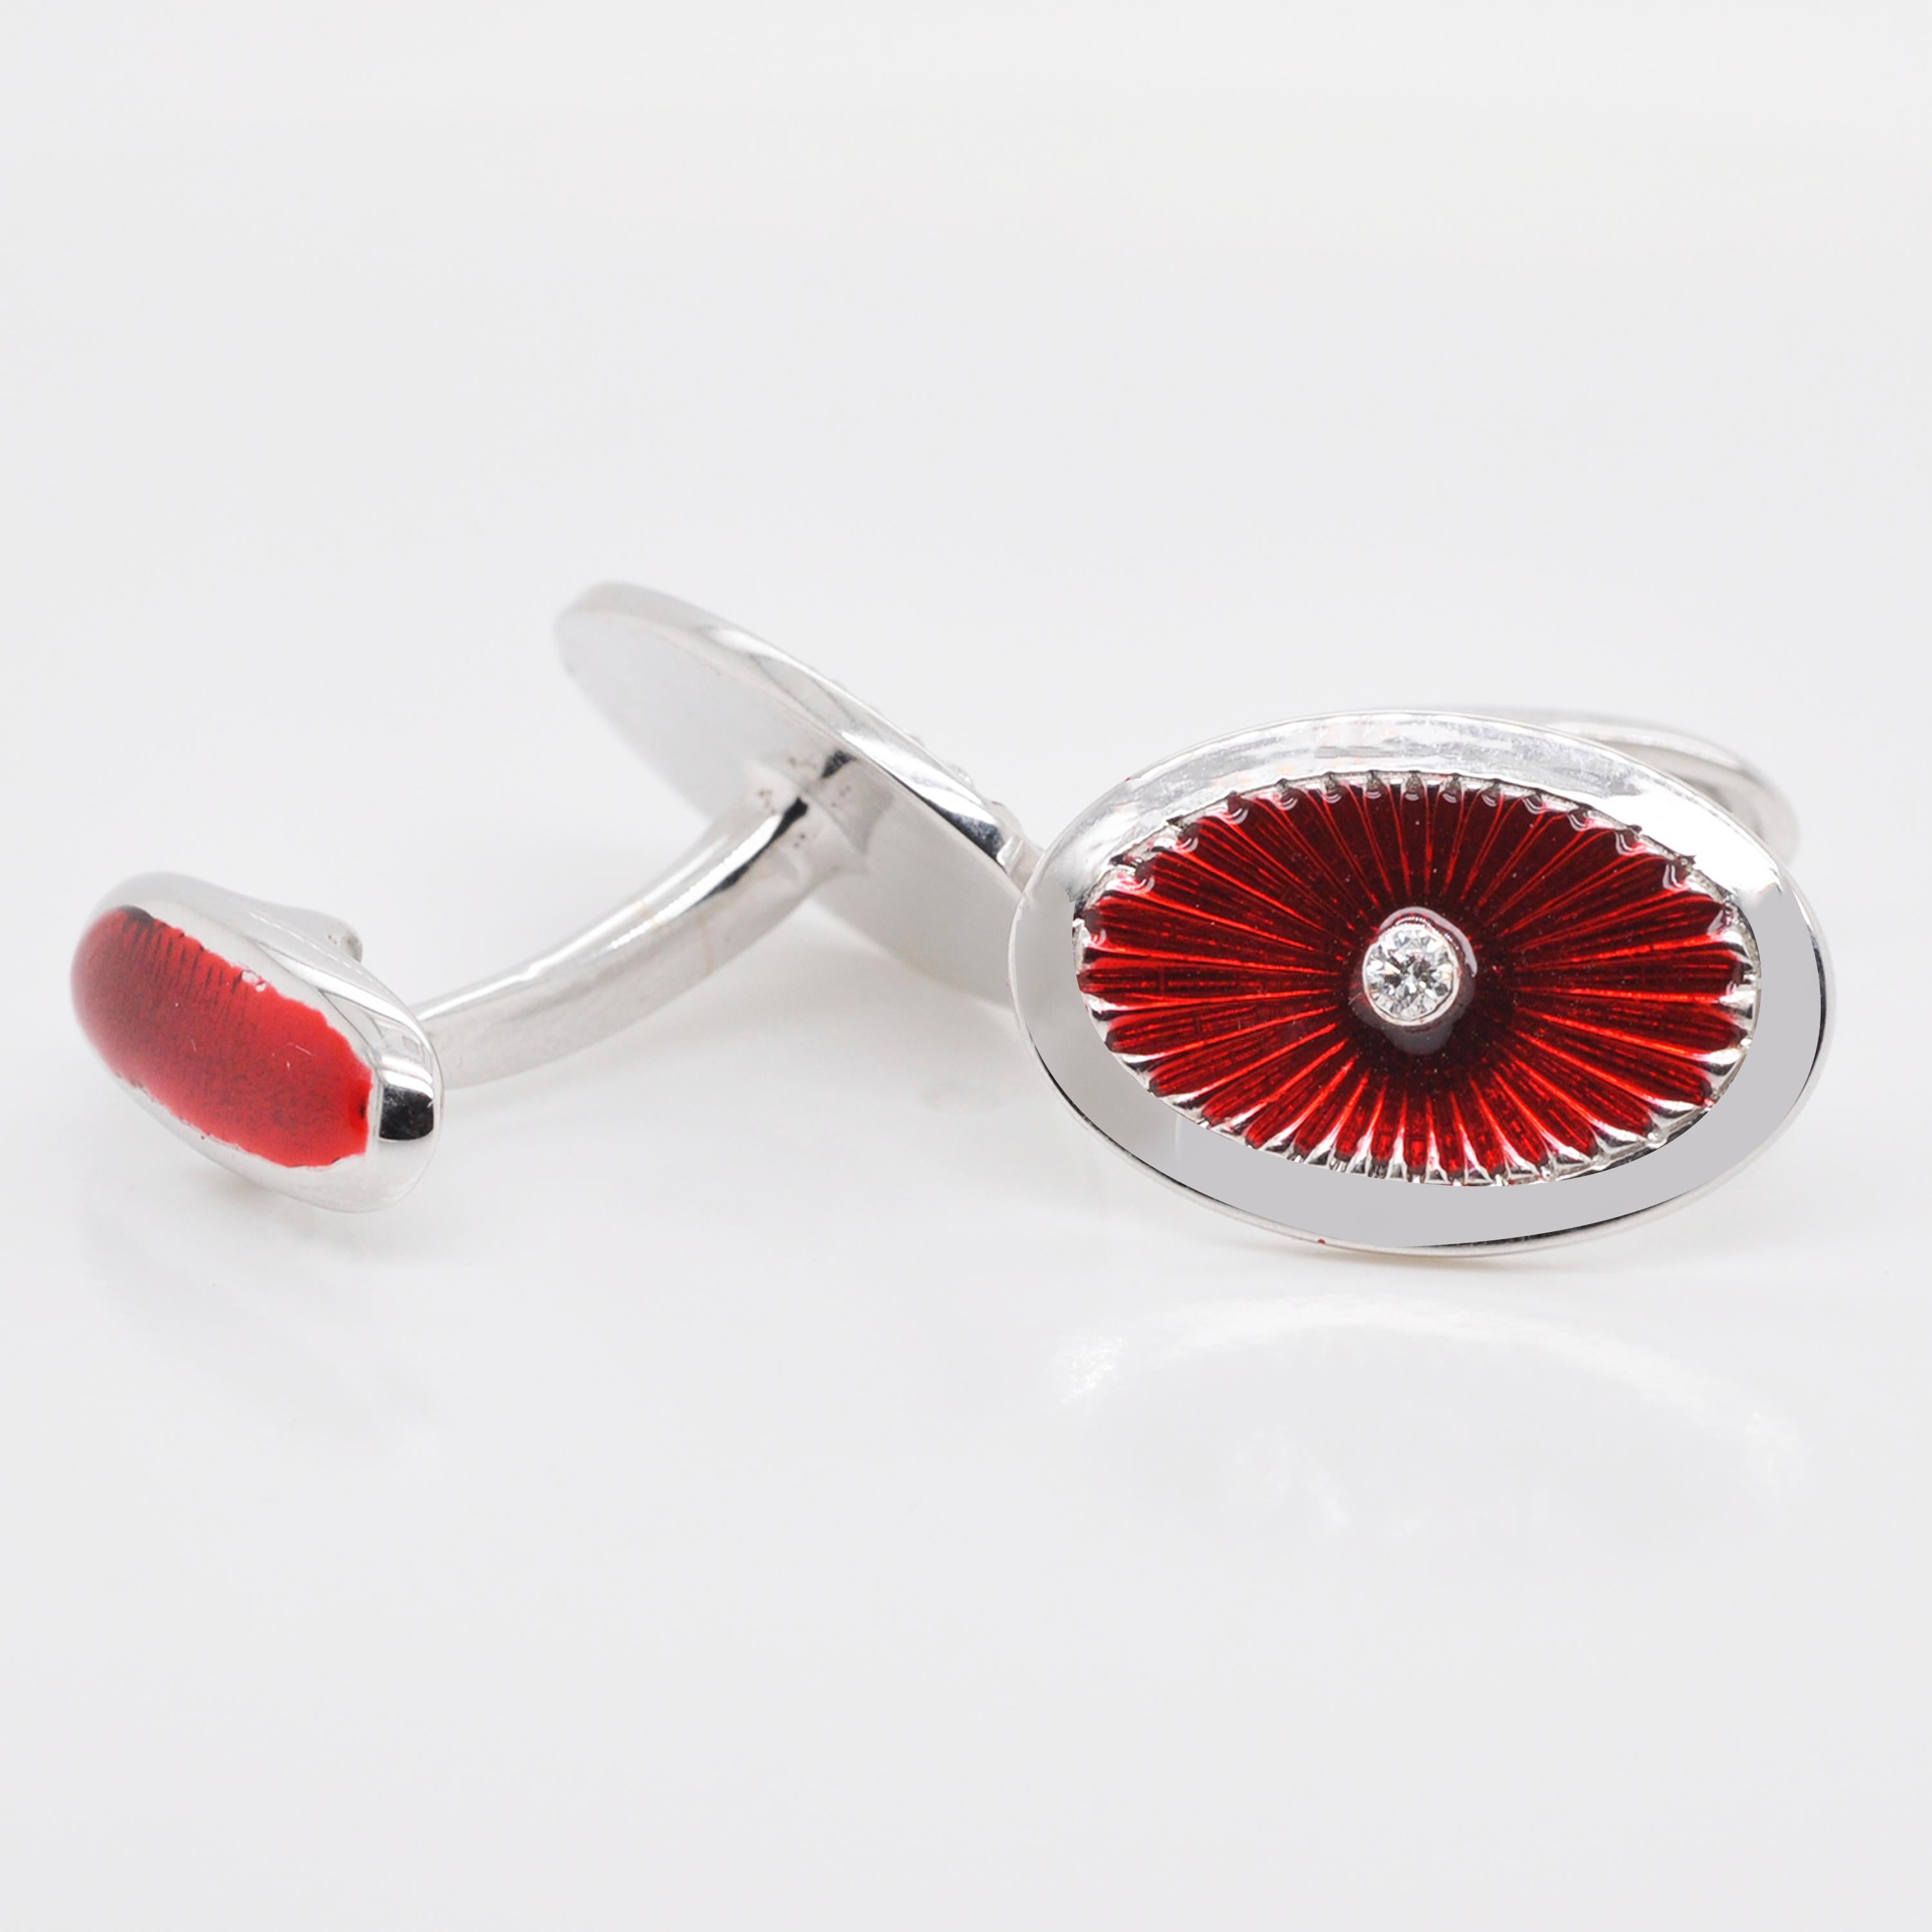 Made from 18 karat white gold, these cufflinks are the perfect mix of contemporary style with a dash of deep red colour. These oval shaped cufflinks feature stunning deep red guilloché enamel with radiant patterns under the enamel, enveloped within